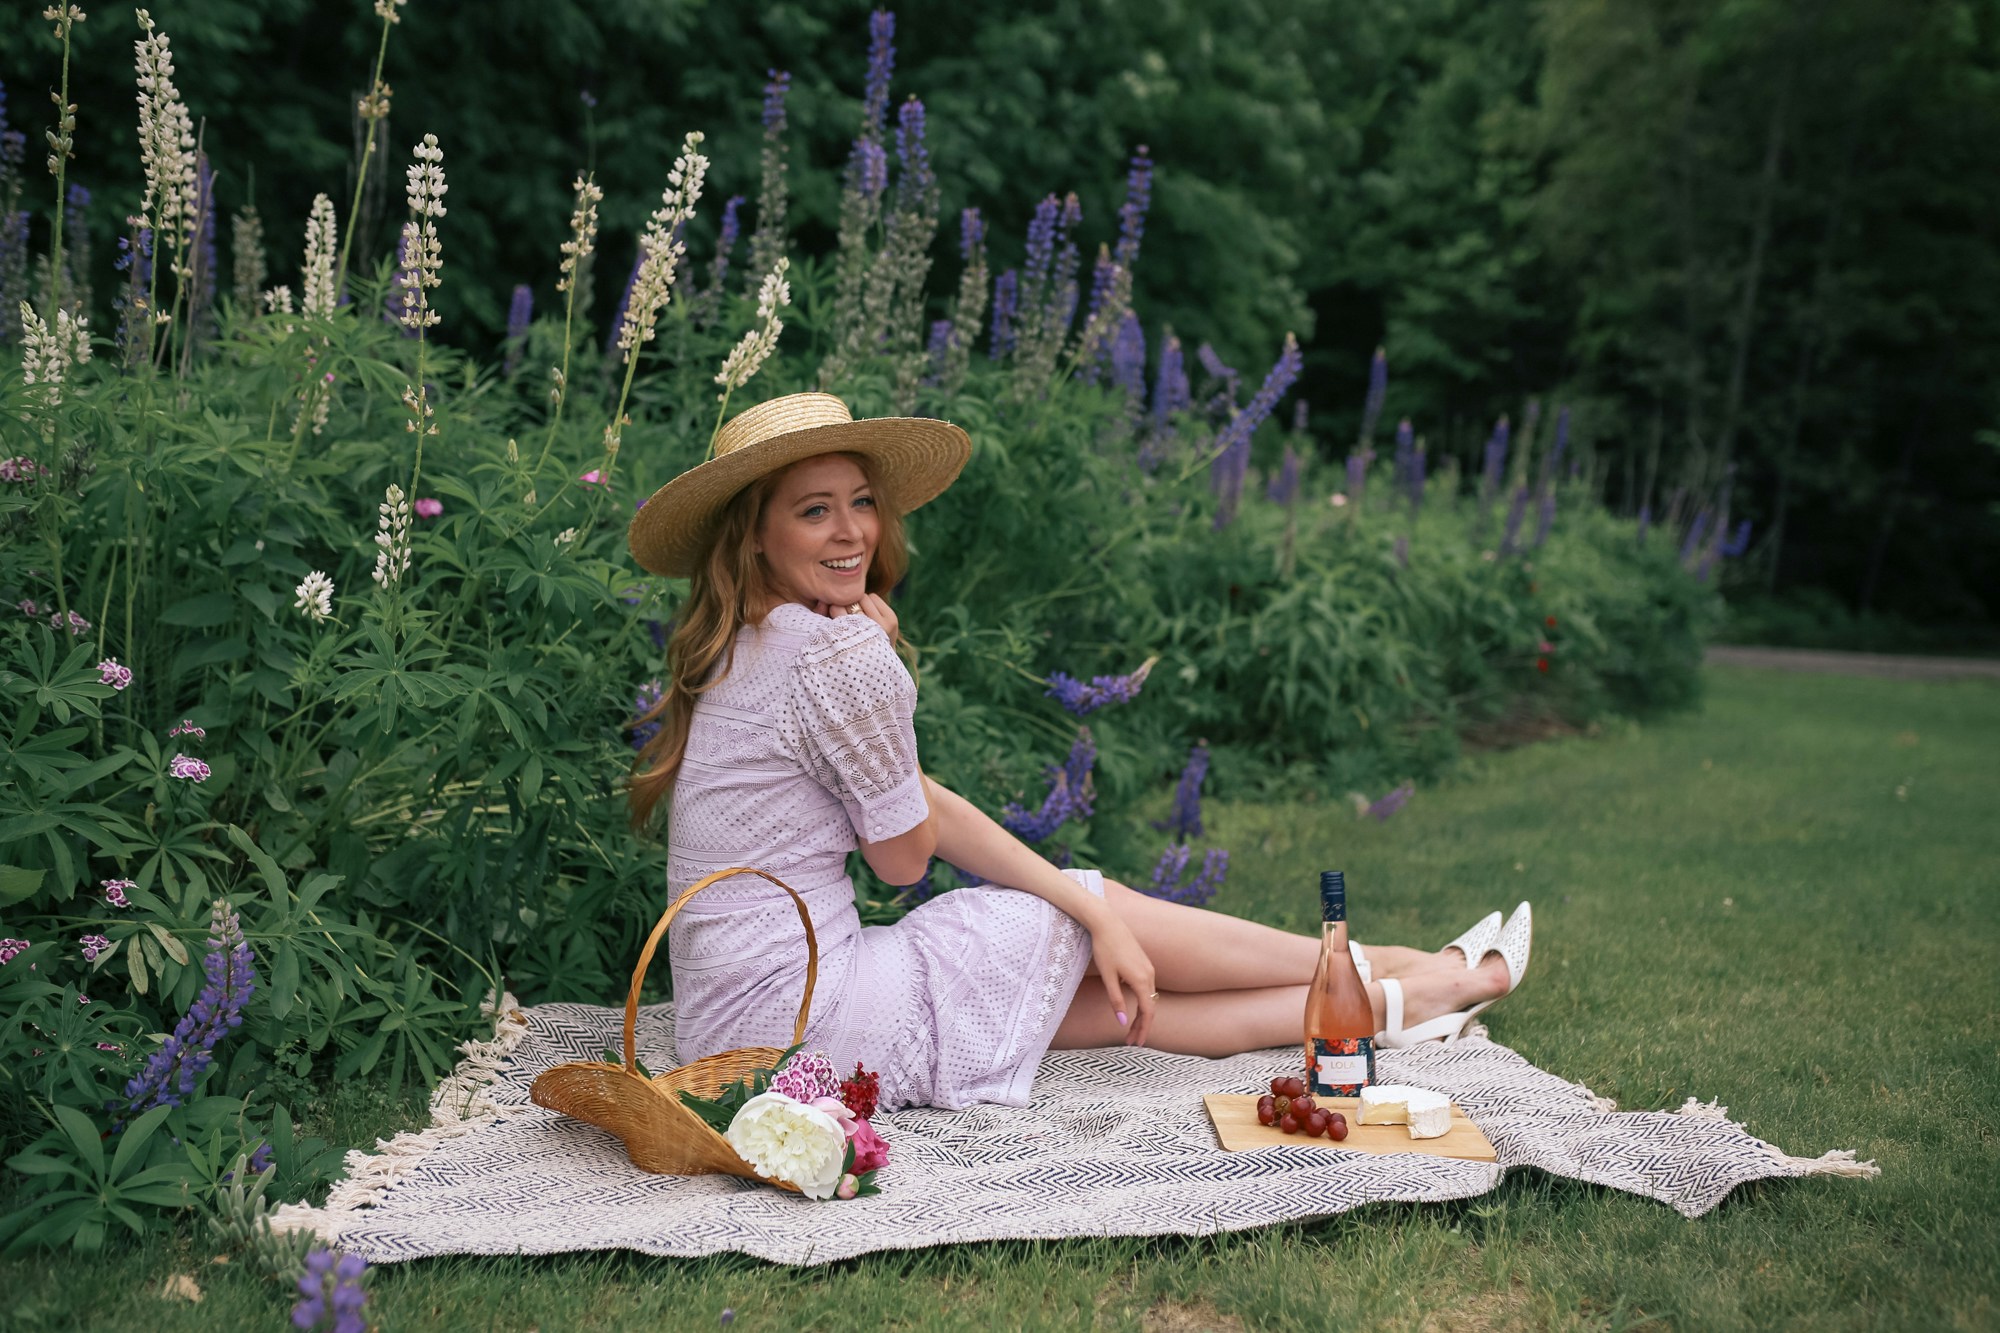 A picnic would never be complete without rose, a pretty lace dress and some cheese! Check out my Rachel Parcell Dress Review - Purple Hush Square Neck Lace Dress for more!